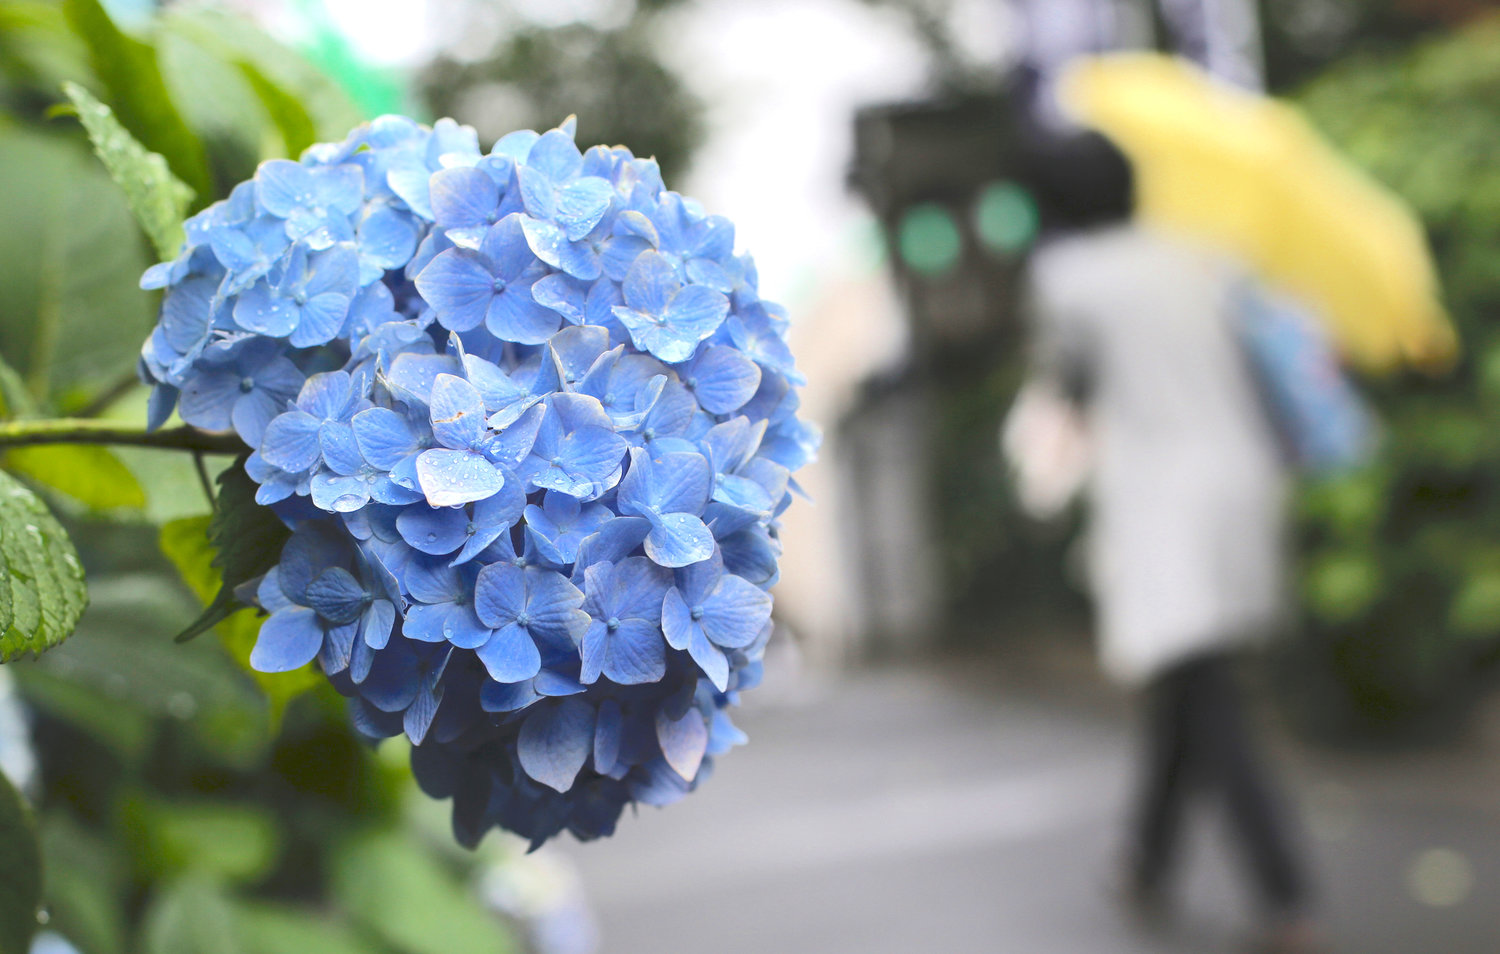 Hydrangea flower are in bloom in the rain at a shrine in Tokyo.